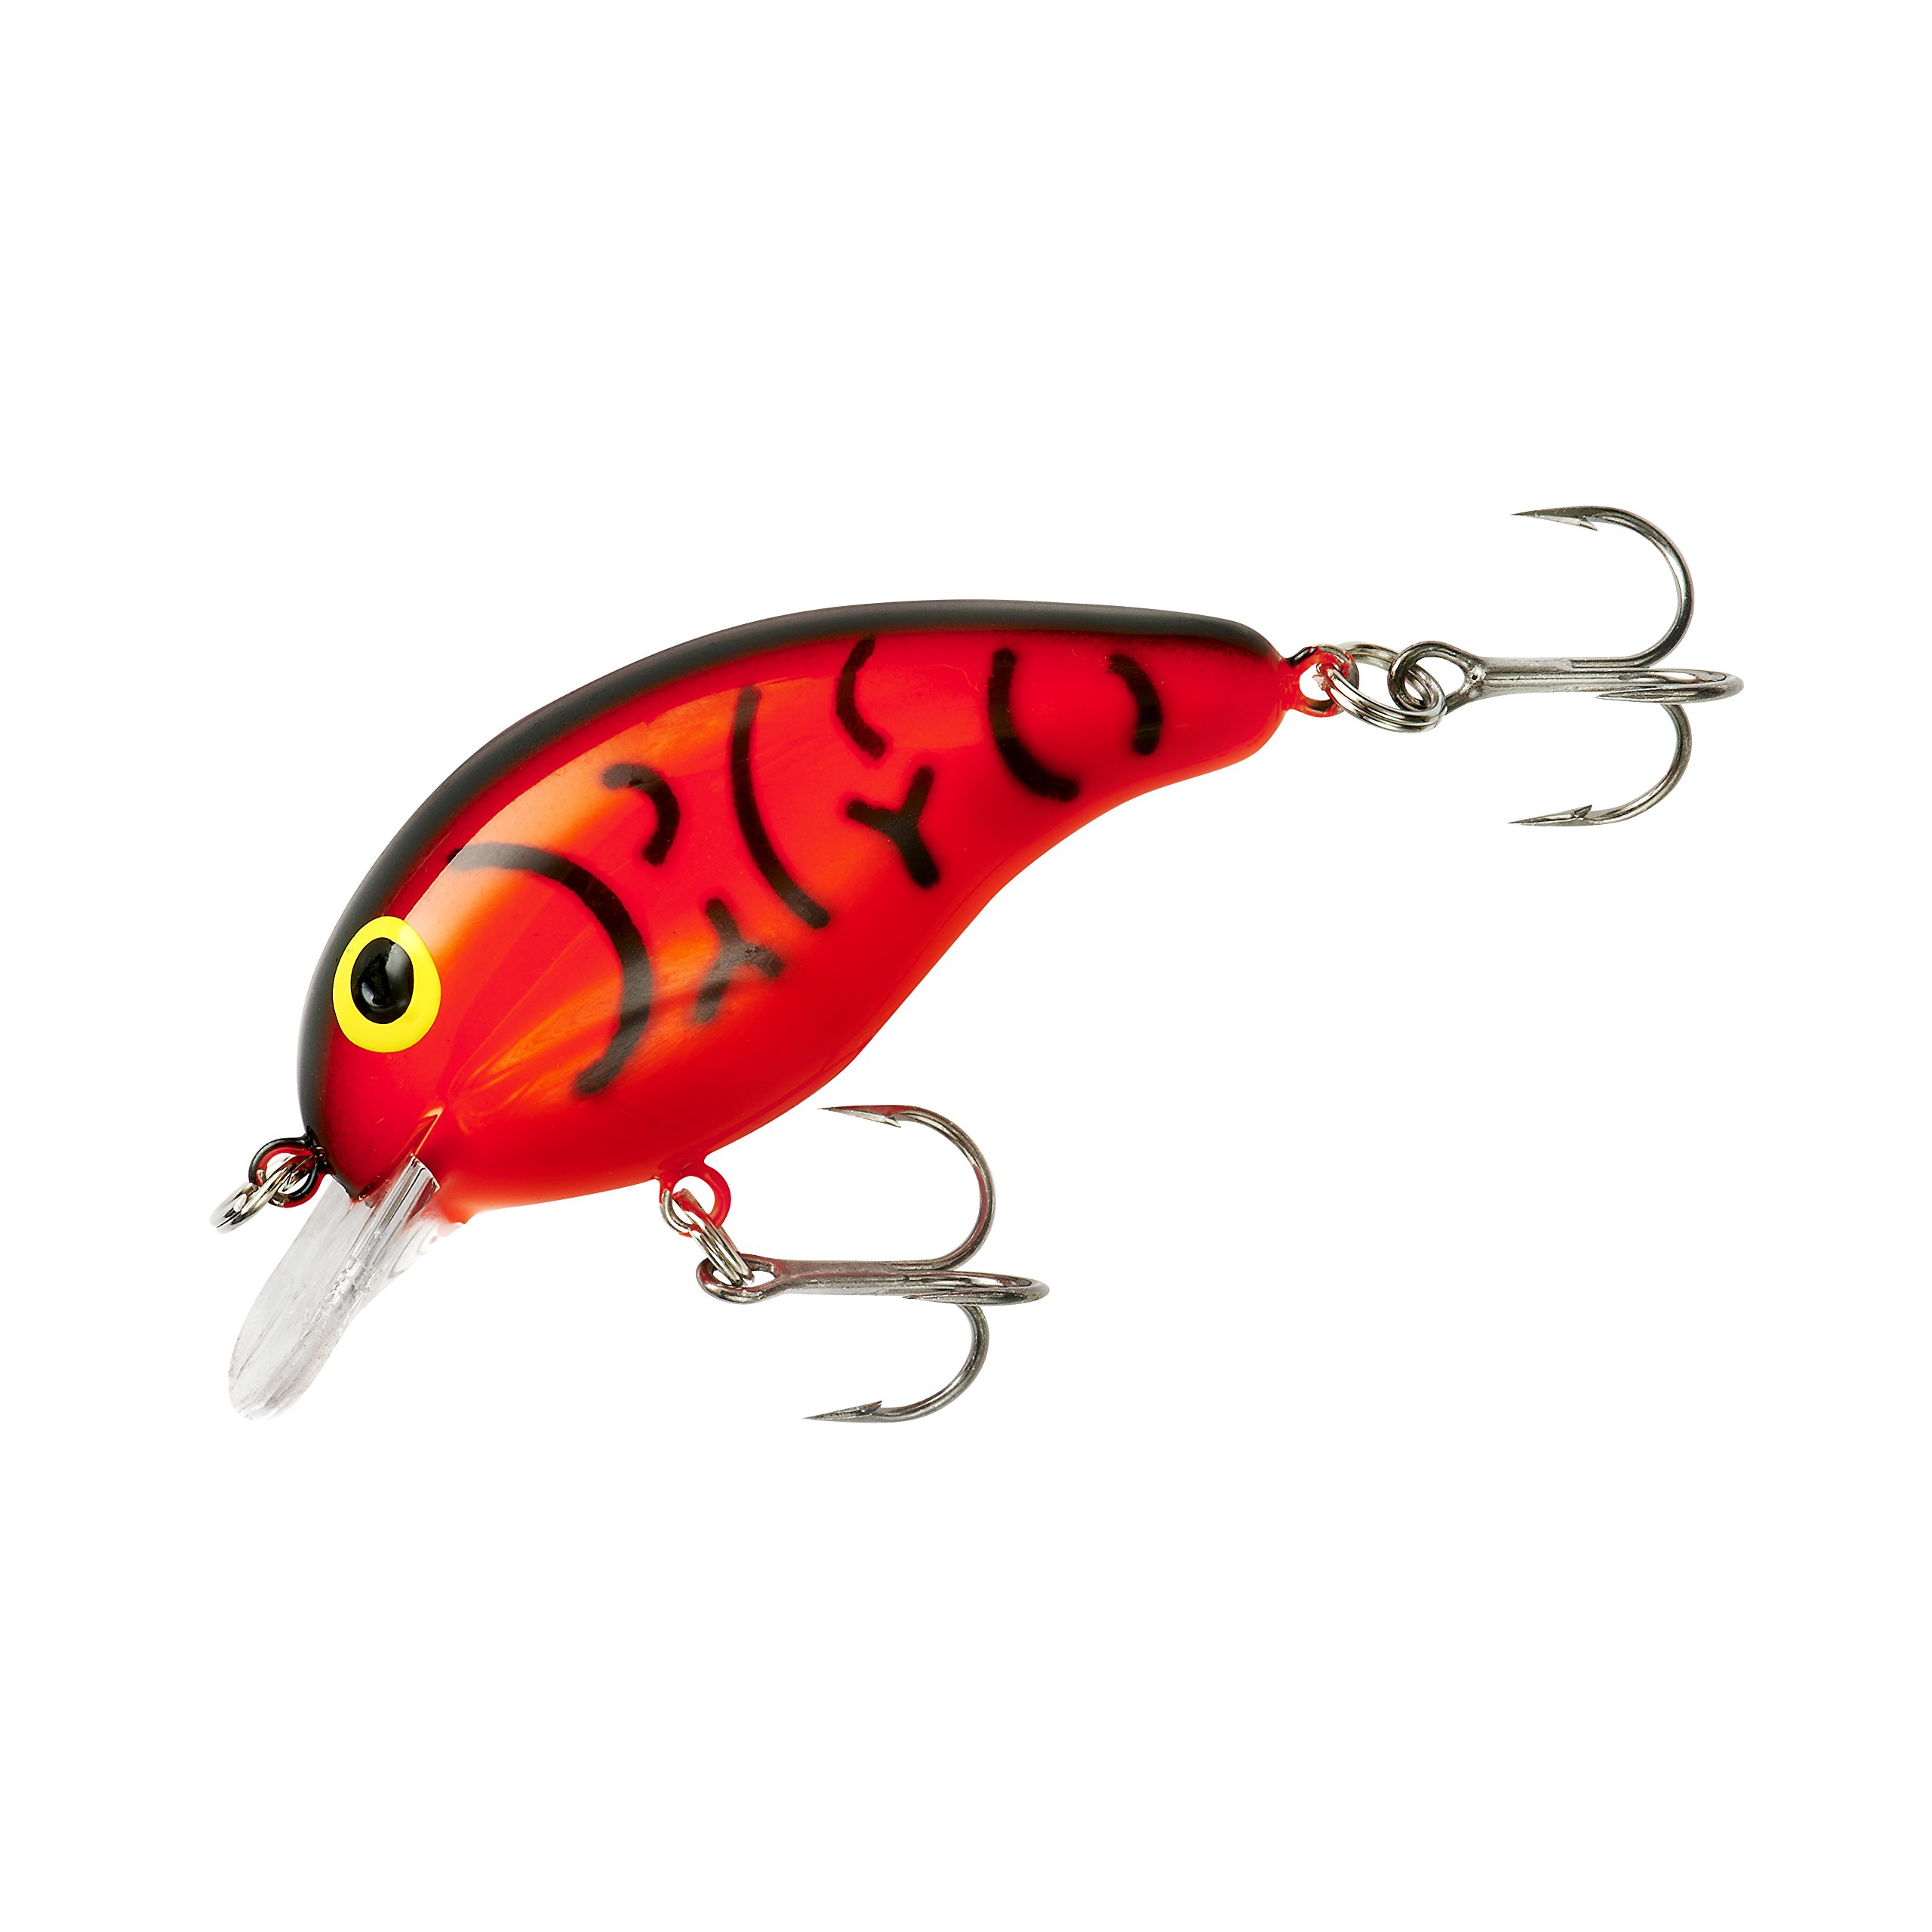 crawfish lure, crawfish lure Suppliers and Manufacturers at